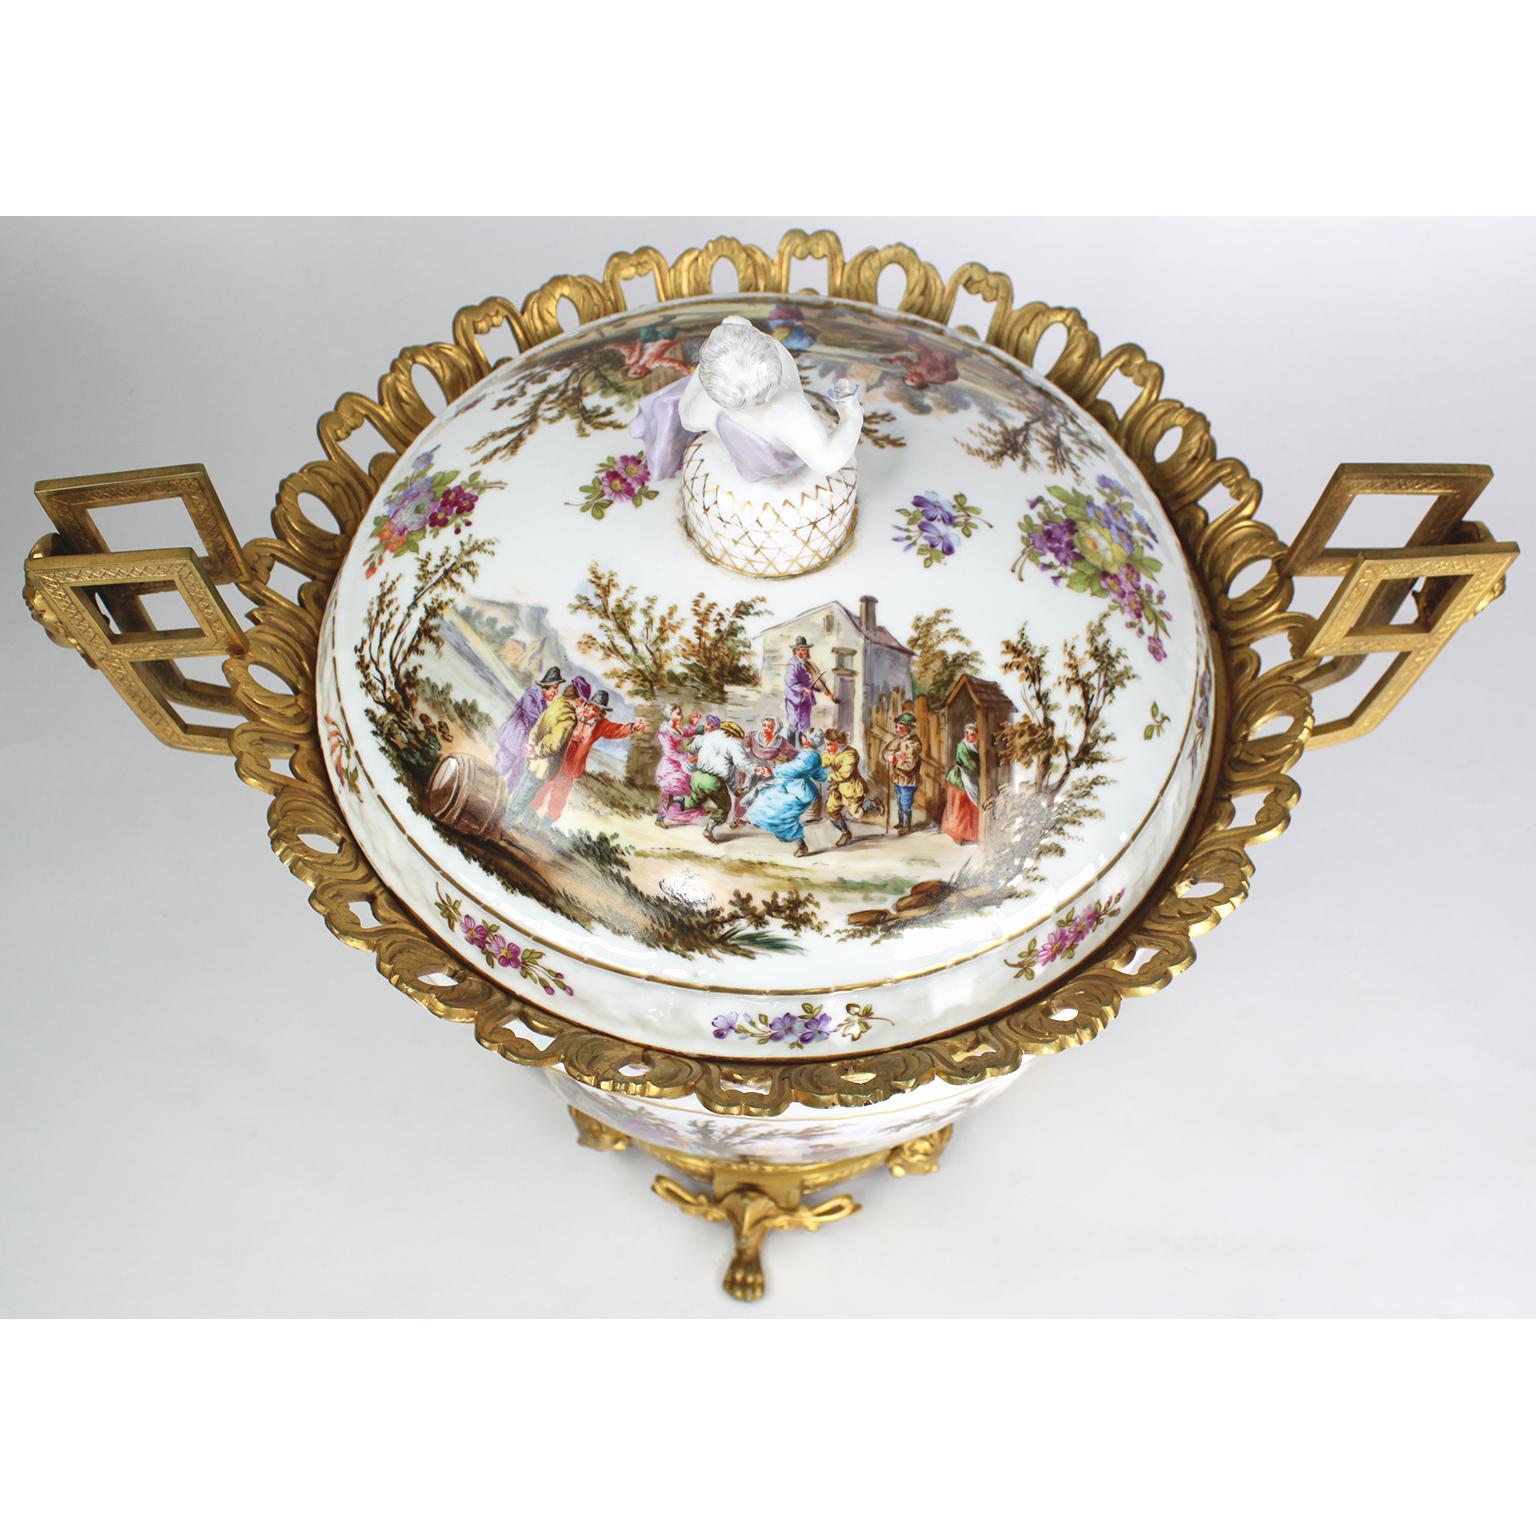 Baroque Revival Large German Porcelain & Gilt-Bronze Mounted Urn with Cover in Manner of Meissen For Sale